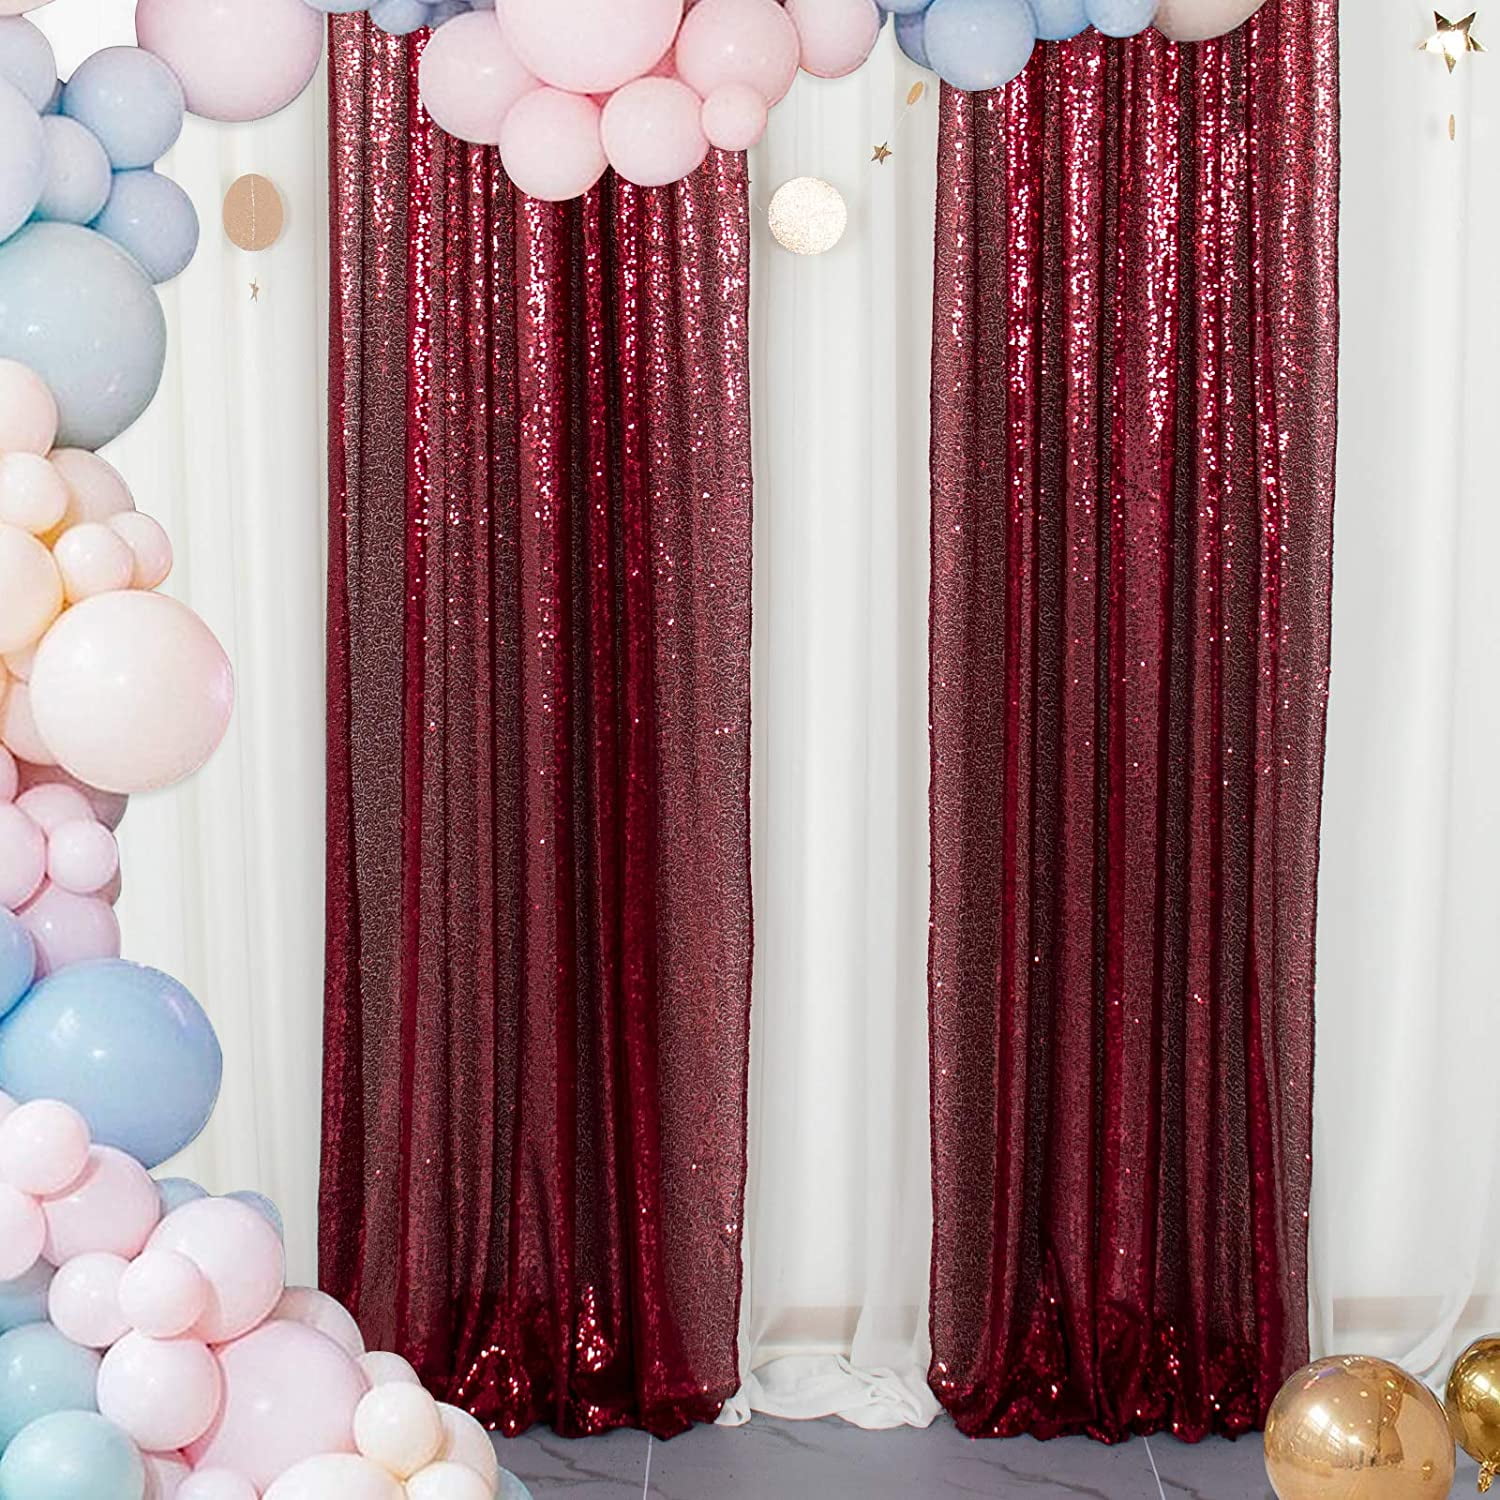 2 Panels Shimmer Sequin Curtain Potography Backdrop Home Party Decor 8ft/7ft/6ft 